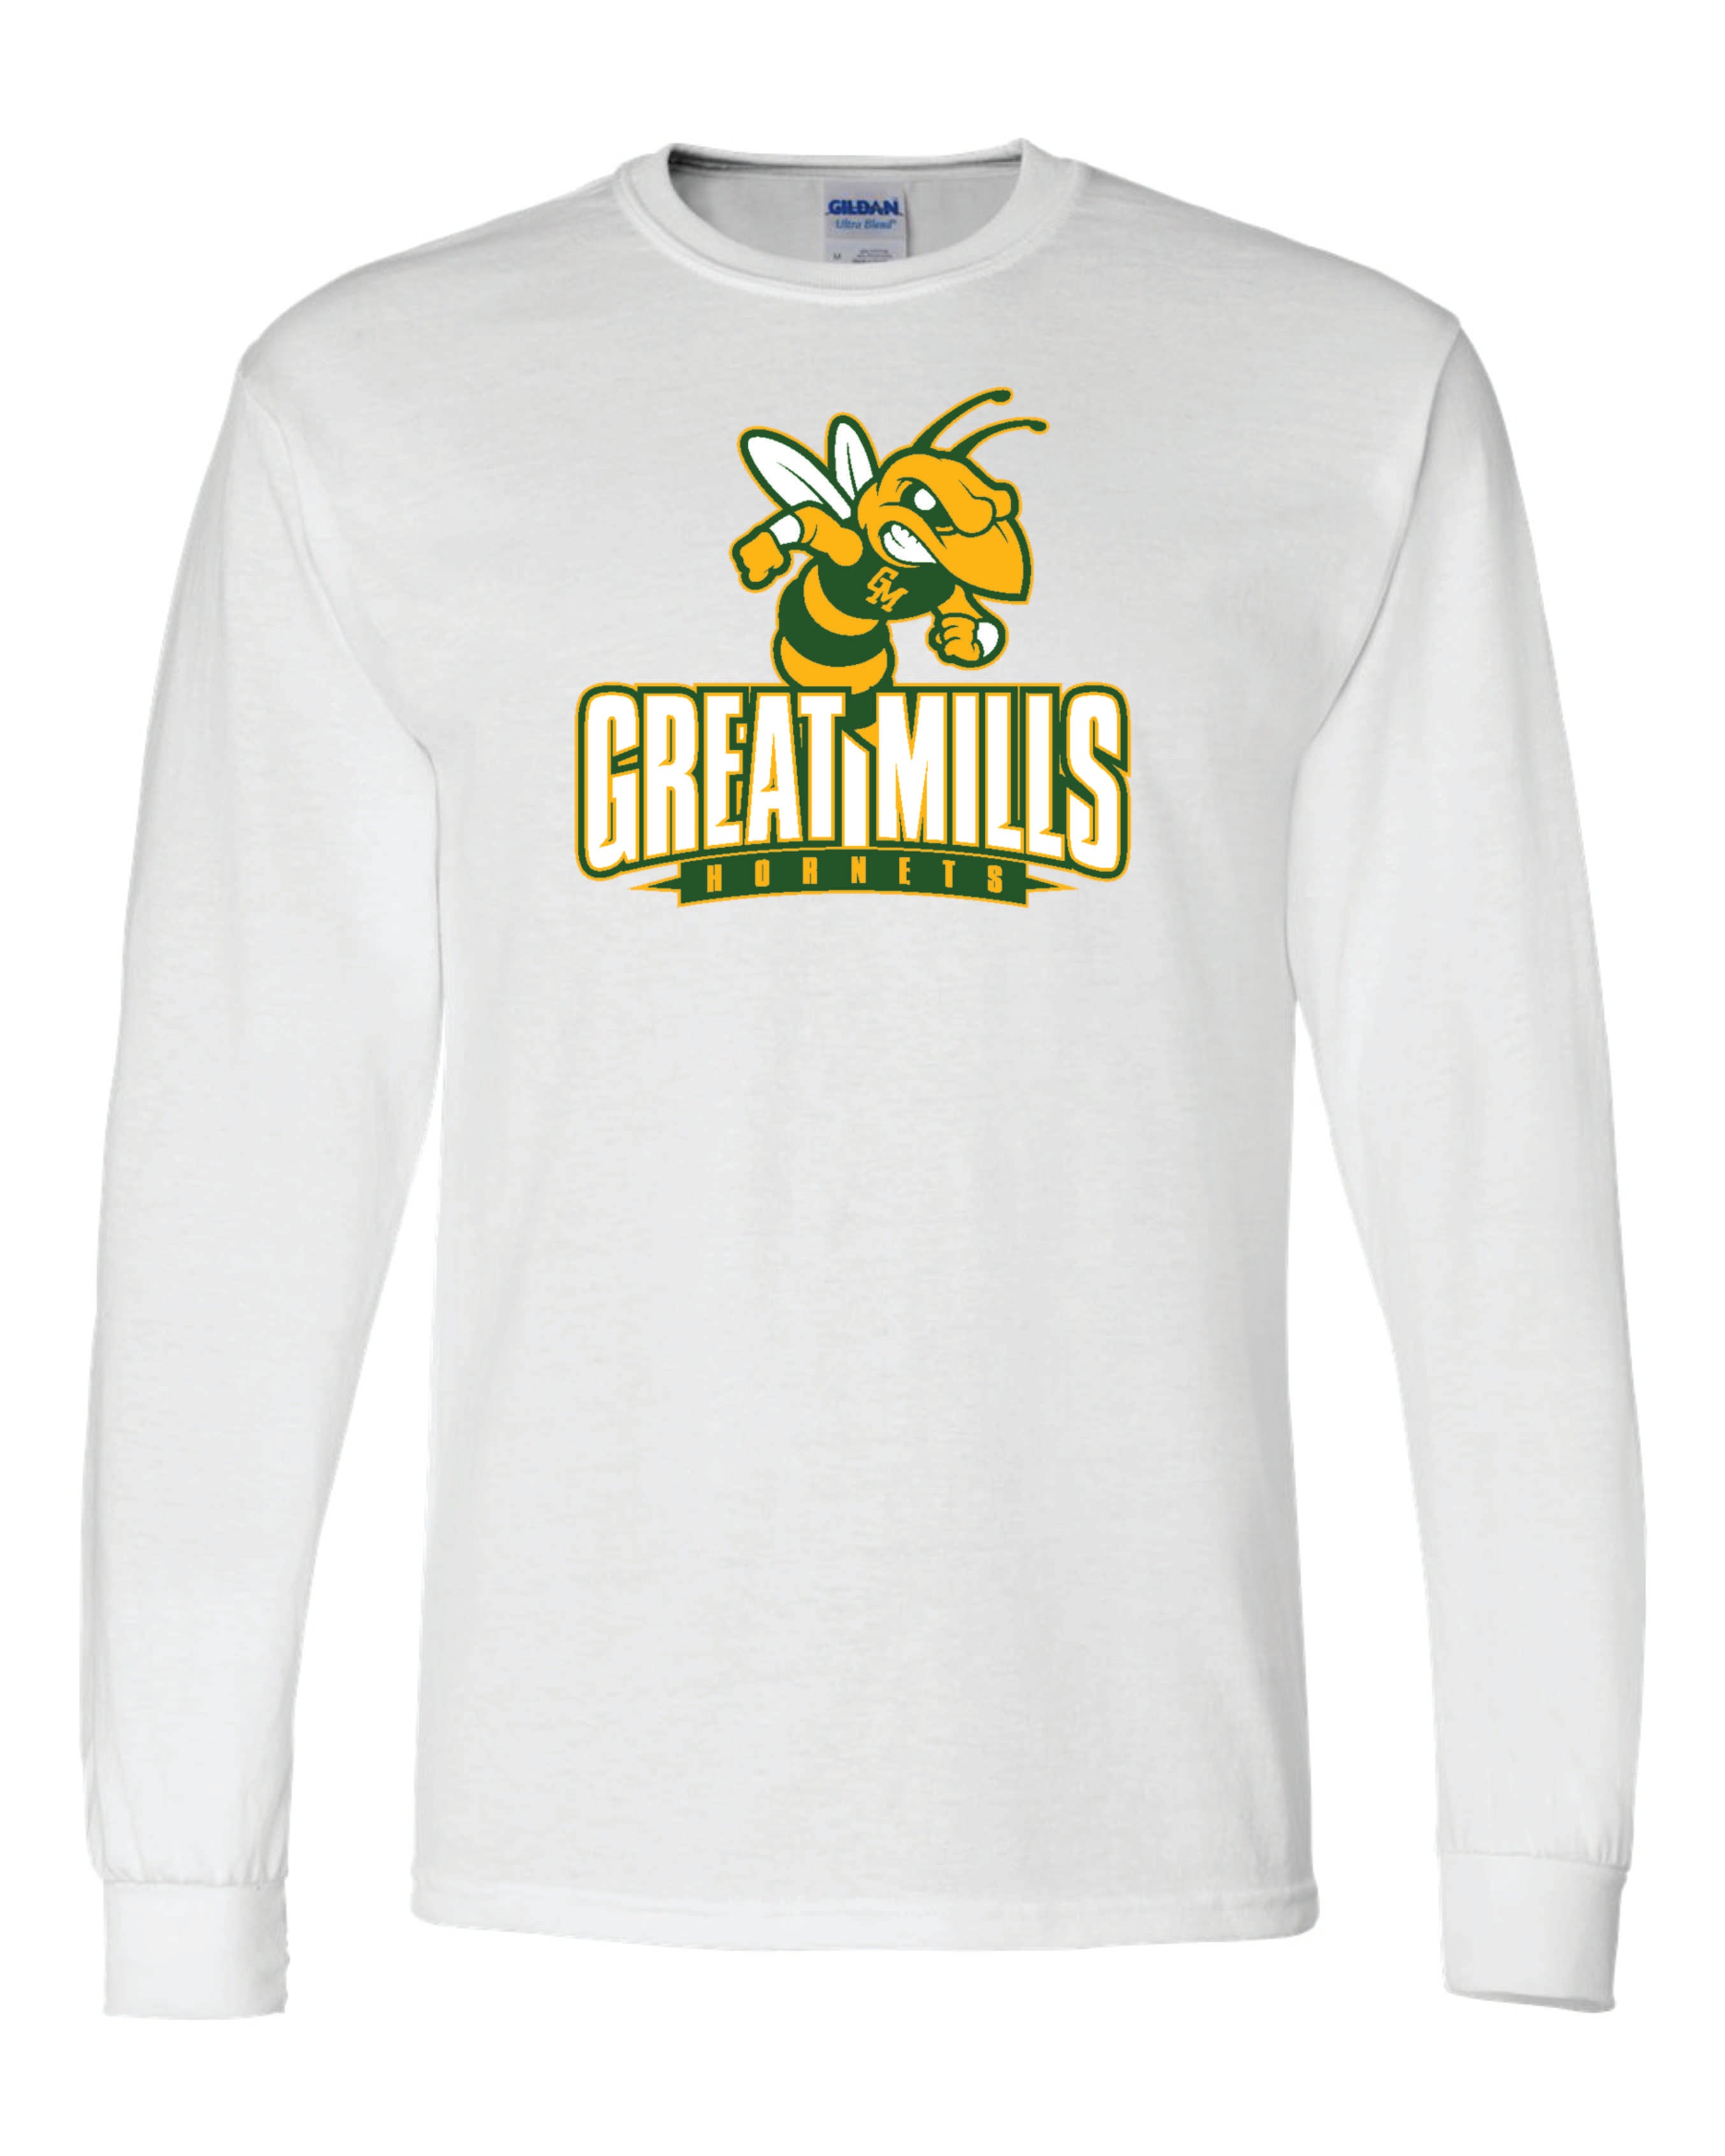 Great Mills Football 50/50 Long Sleeve T-Shirts - YOUTH